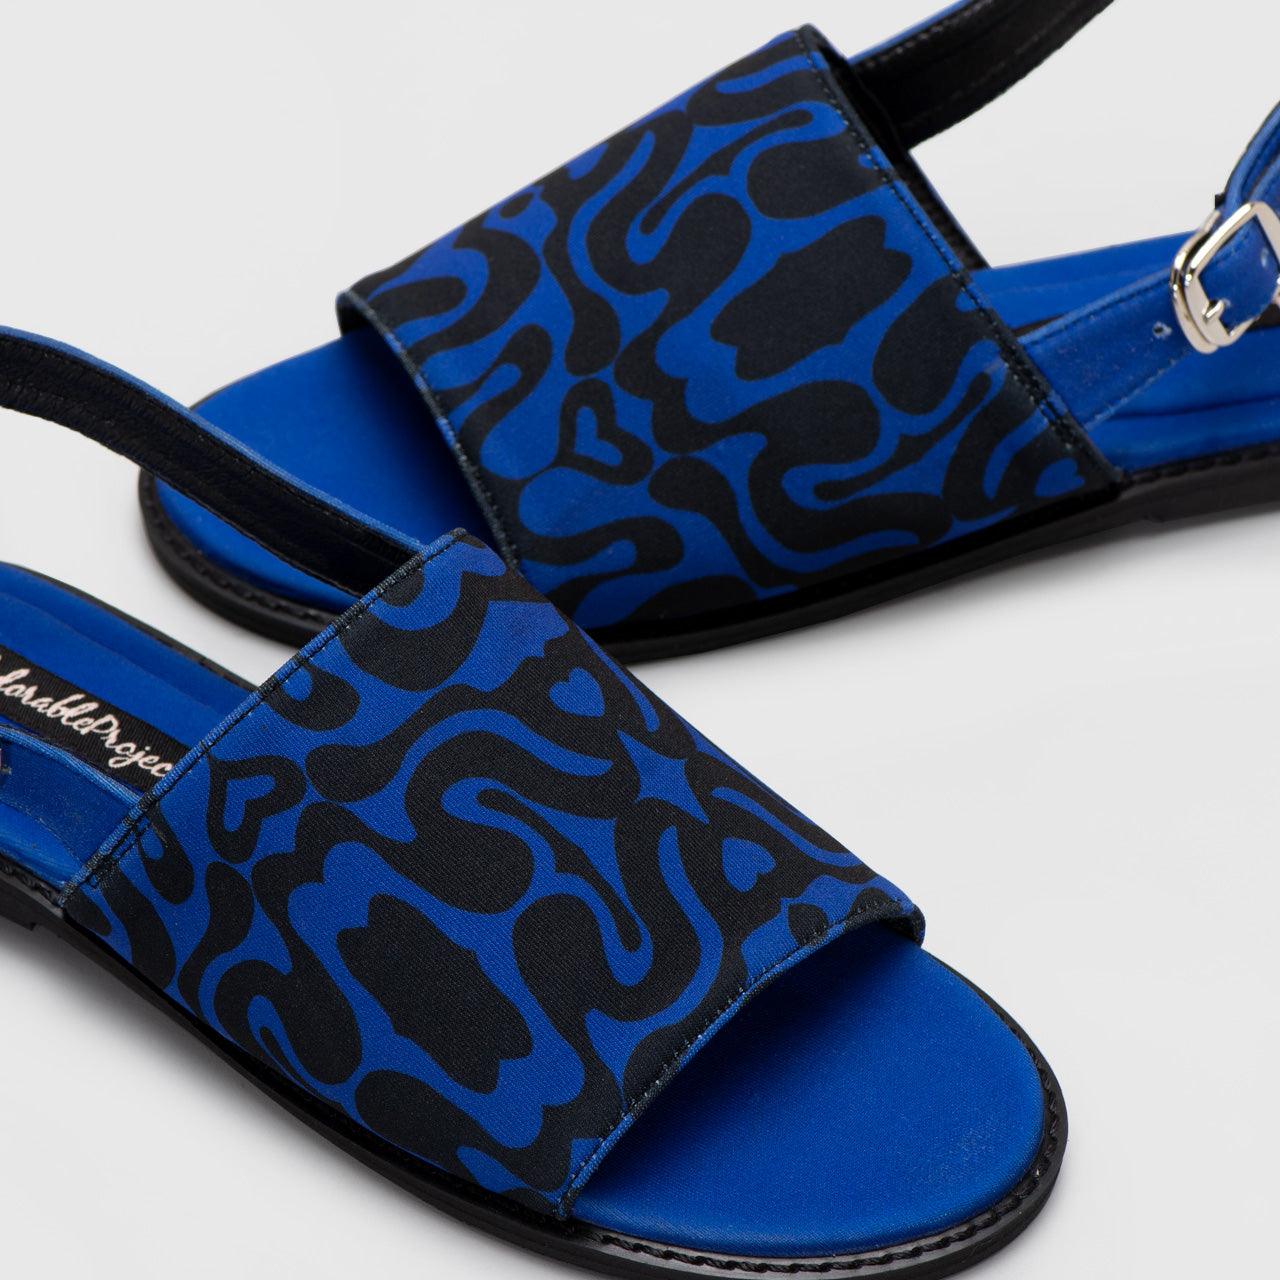 Adorable Projects Sandals Caspery Sandals Abstract Electric Blue